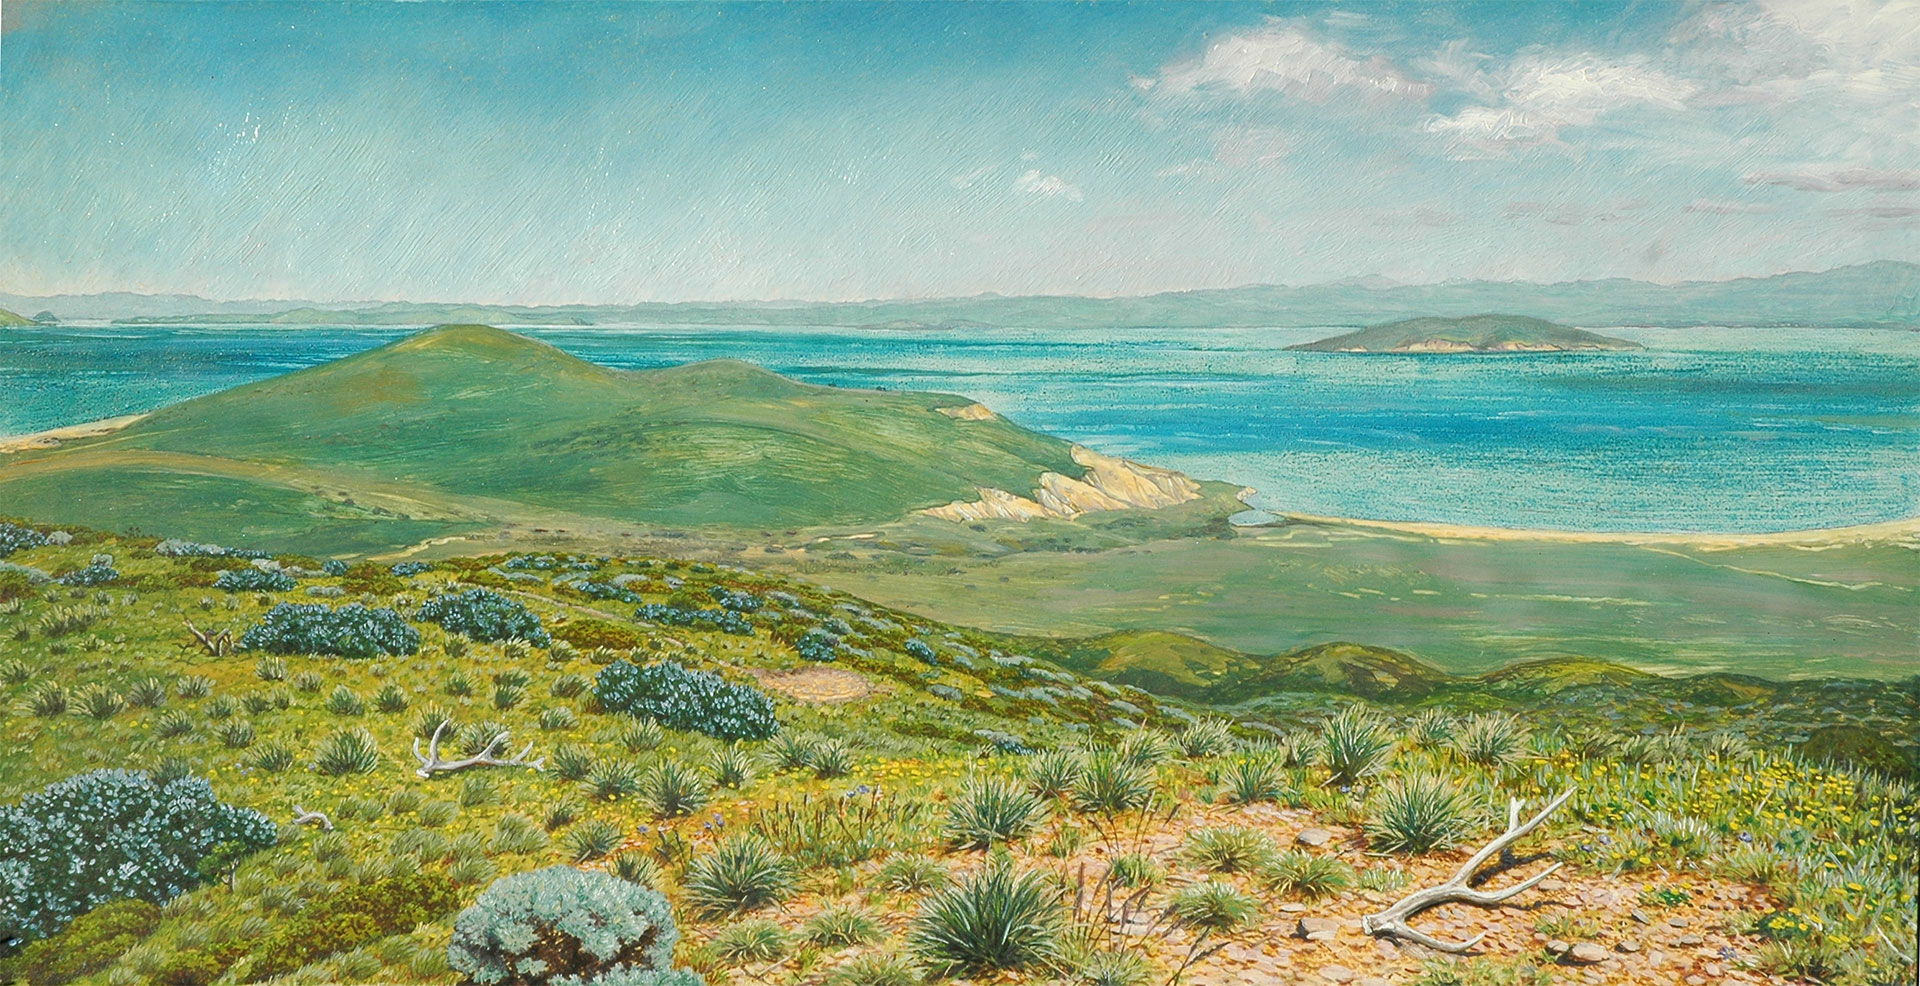 Oil painitng of rollin green hills, scrubby vegetation and a deep blue bay beyond.